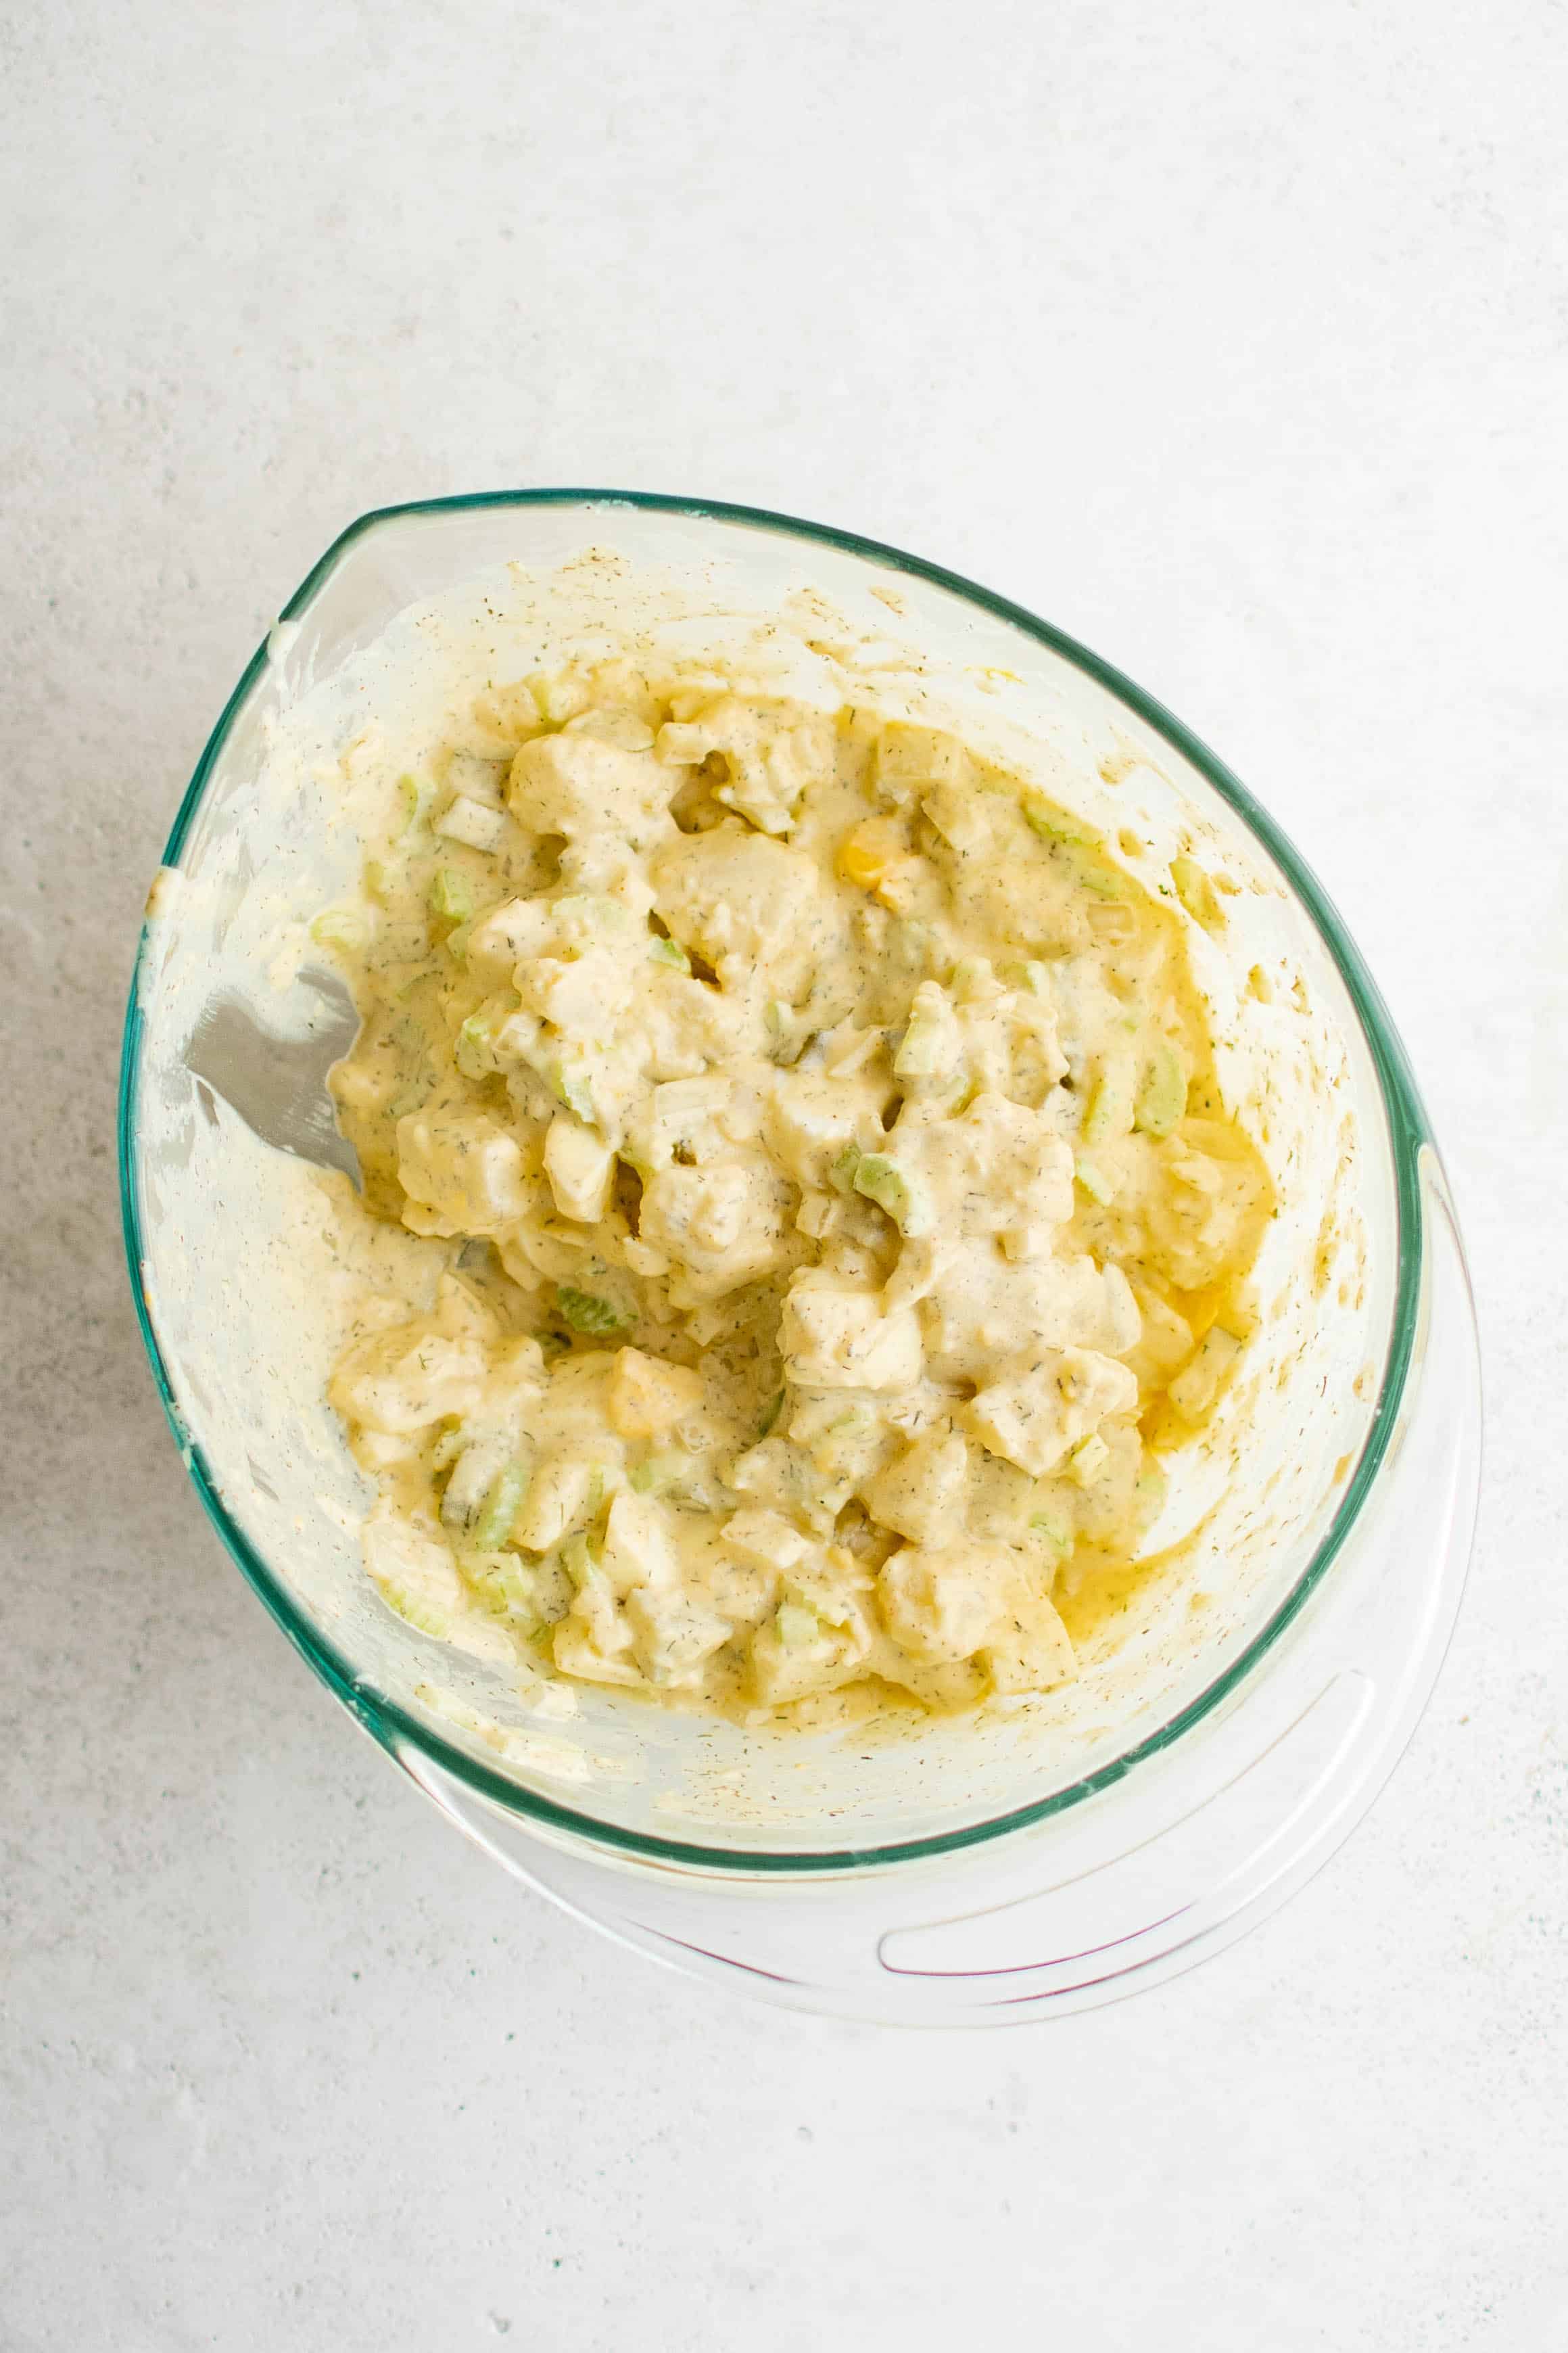 Prepared potato salad mixed together in a mixing bowl.